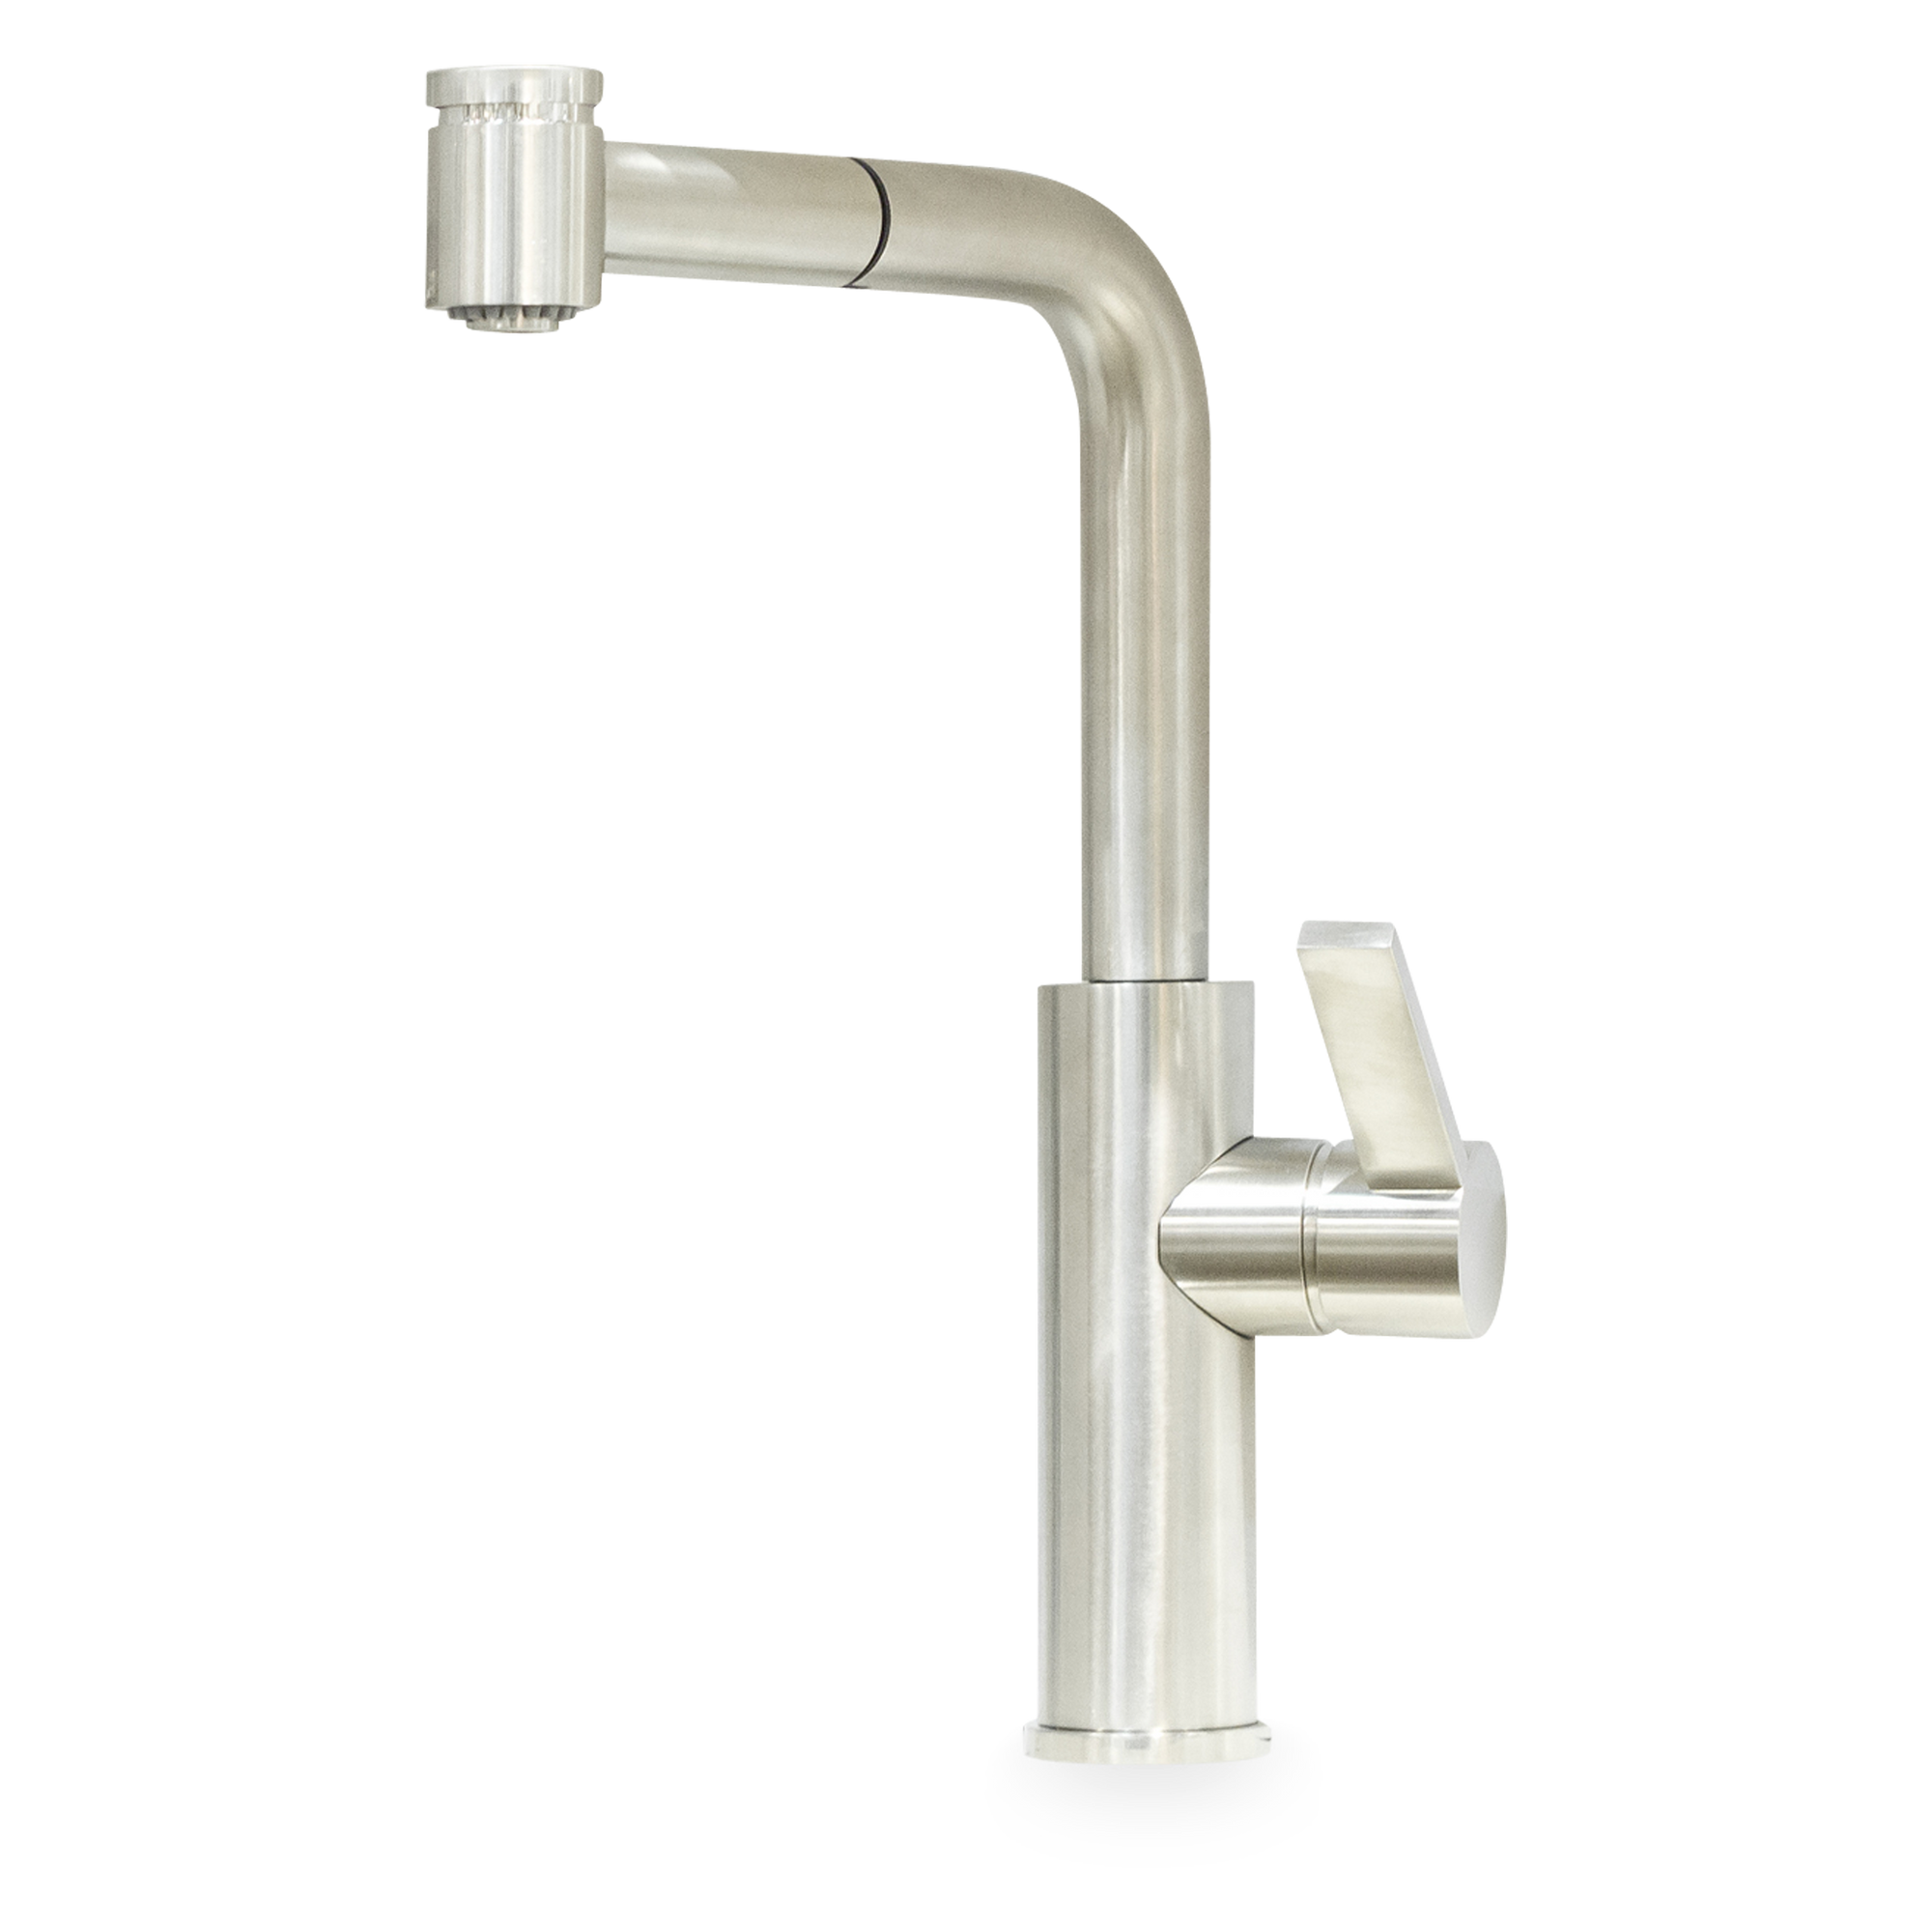 The Irving kitchen faucet is sleek and contemporary, featuring a pull-out spray and single lever handle.